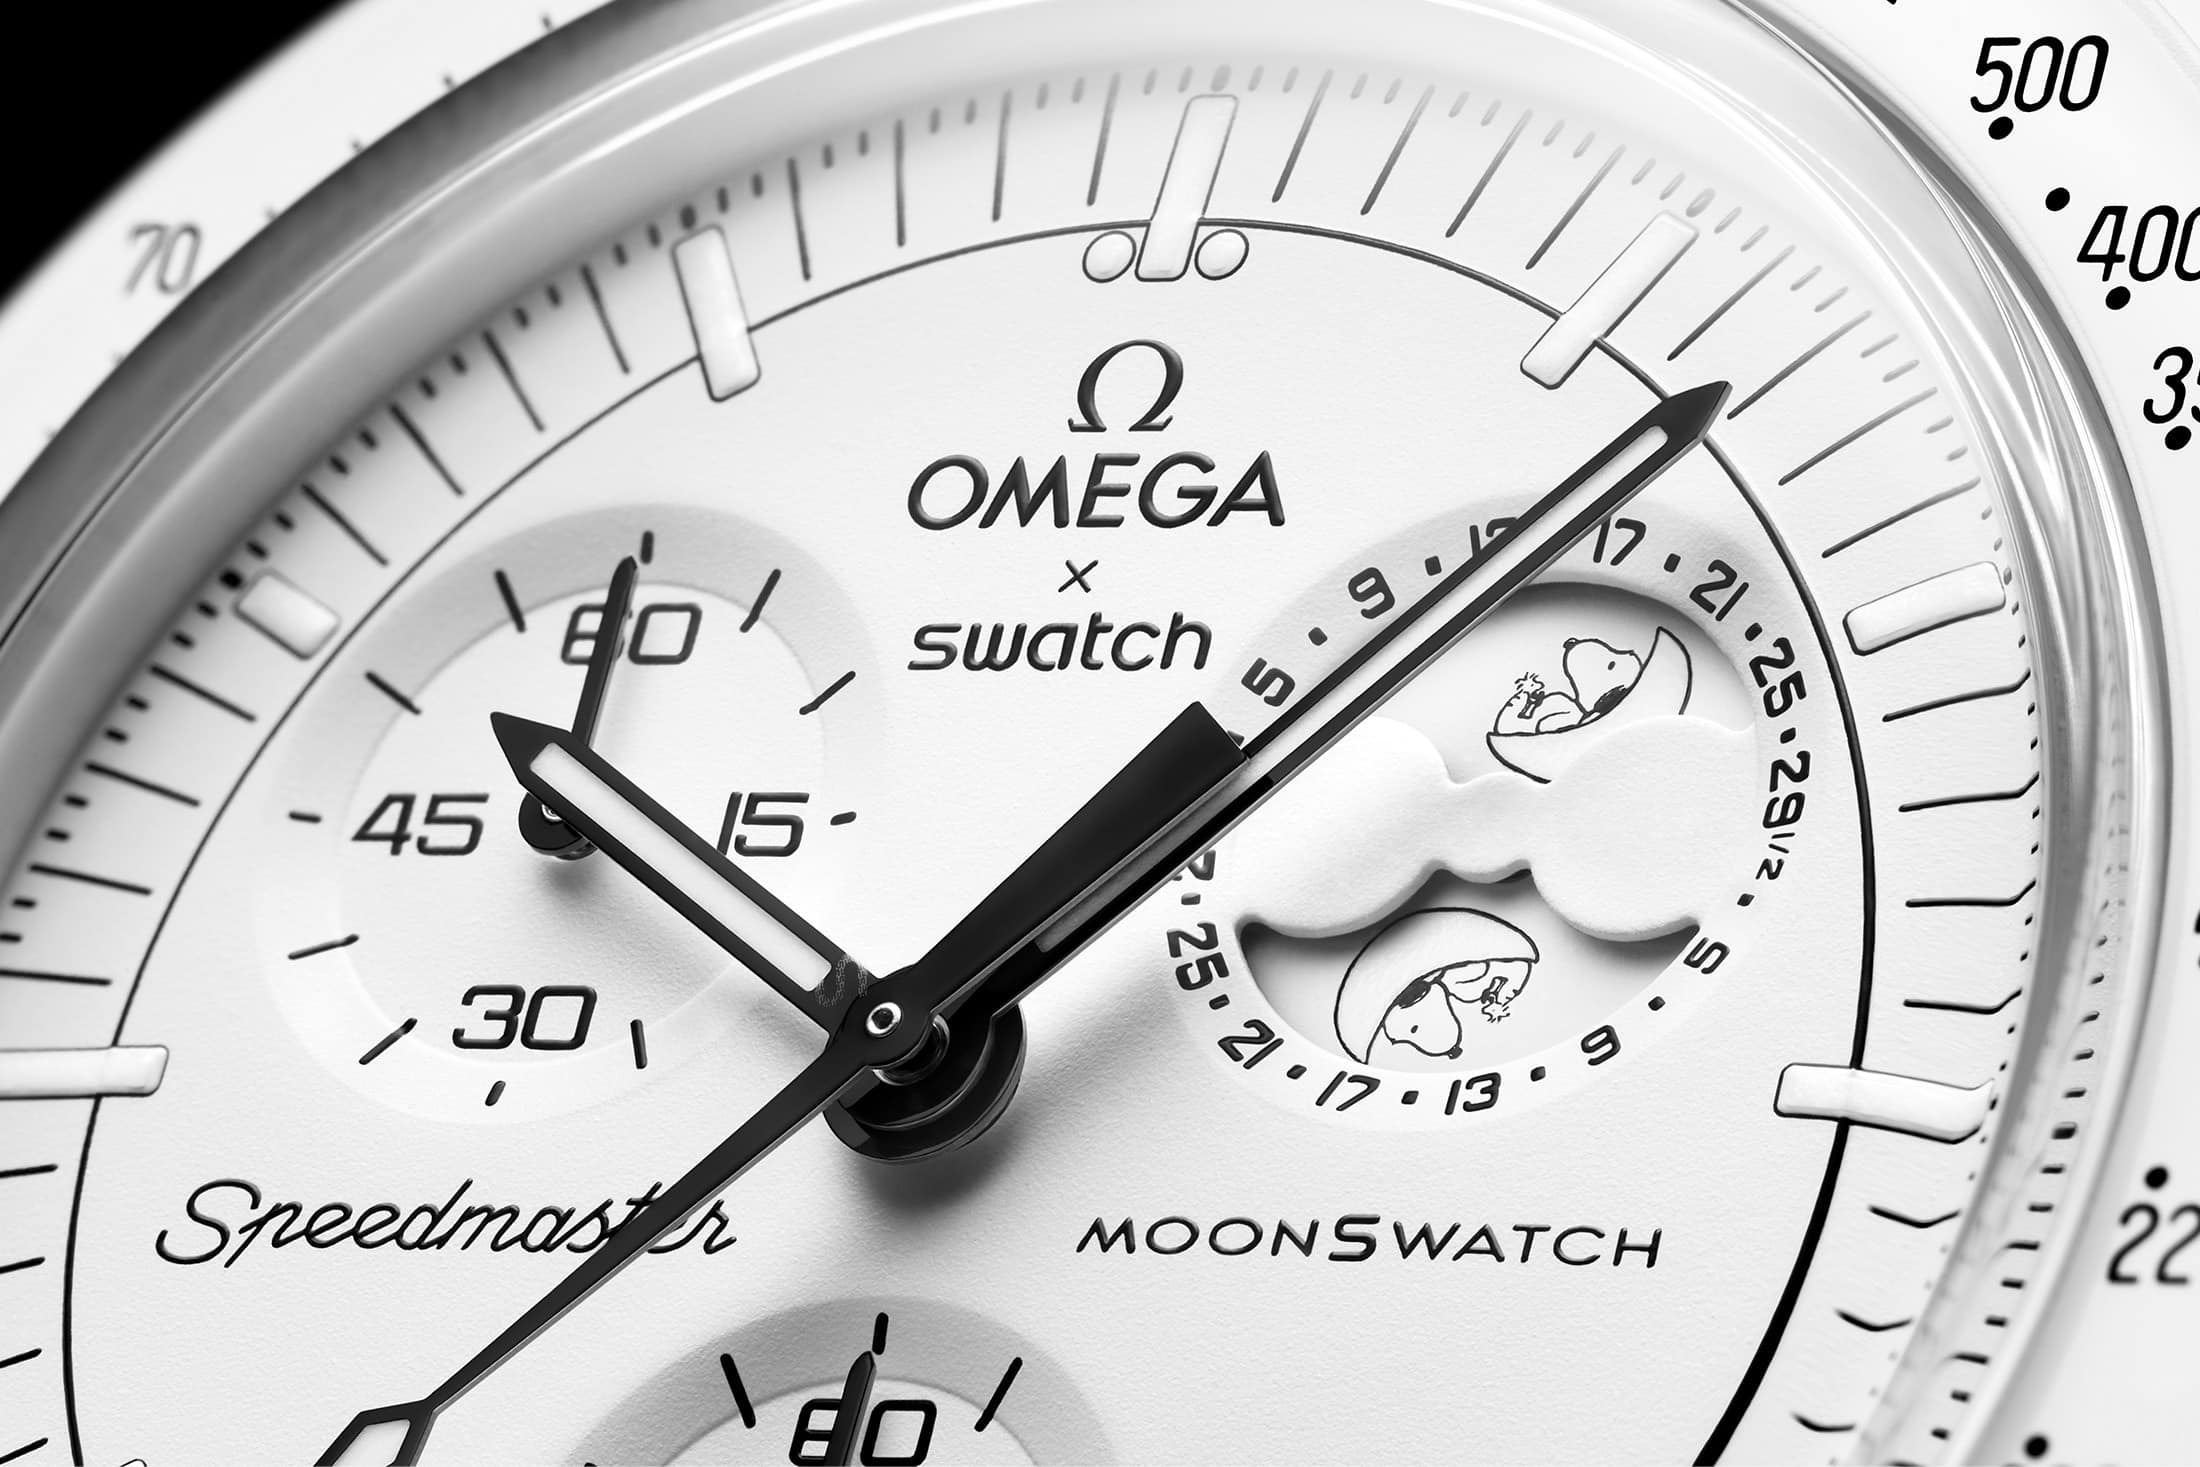 Omega x Swatch MoonSwatch Mission To The Moonphase | We Finally Get Snoopy On The Dial!